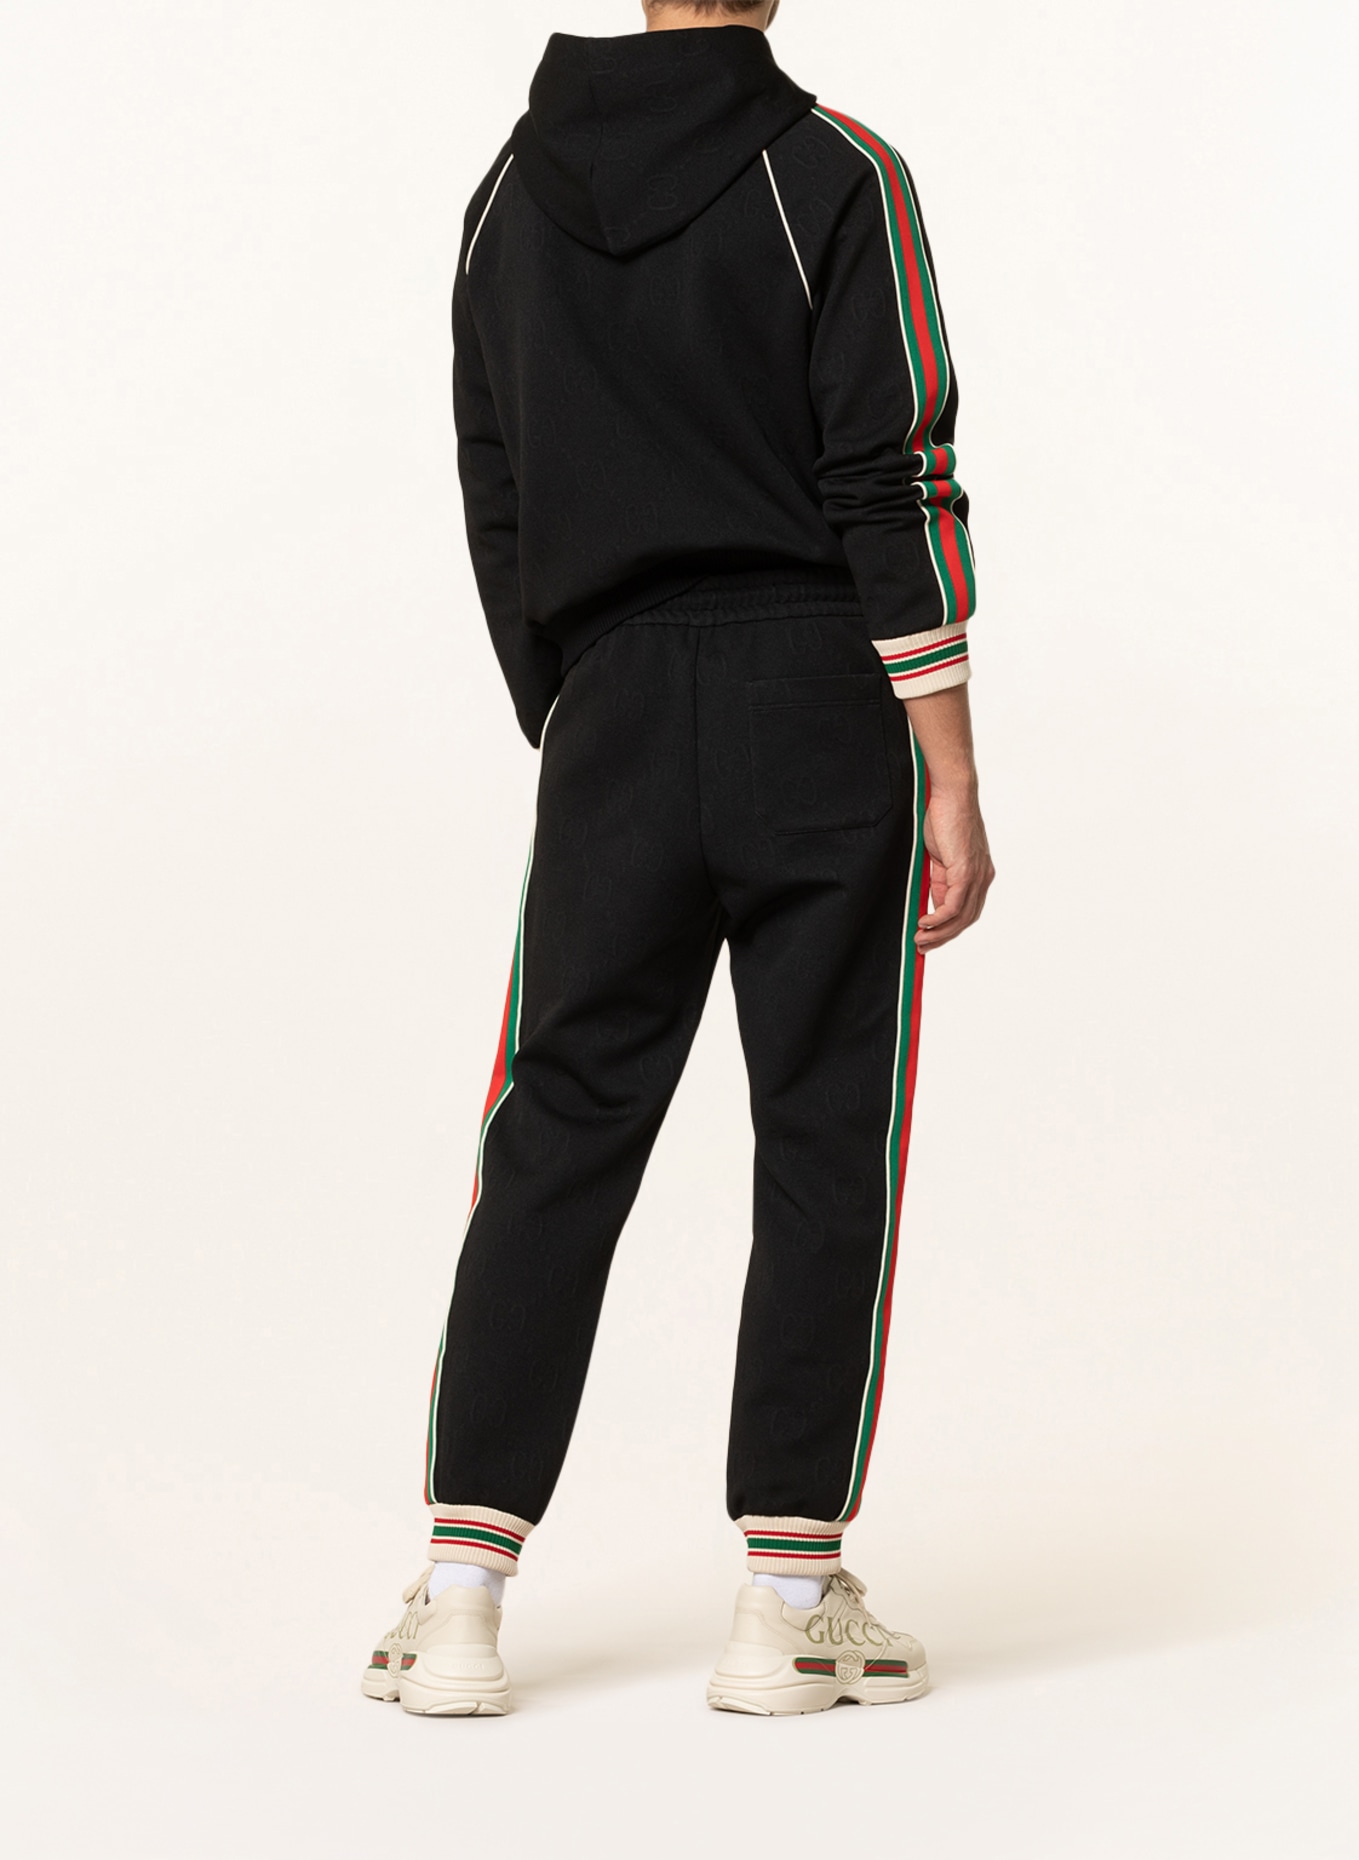 GUCCI Jacquard trousers GG in jogger style with tuxedo stripes, Color: BLACK/ GREEN/ RED (Image 3)